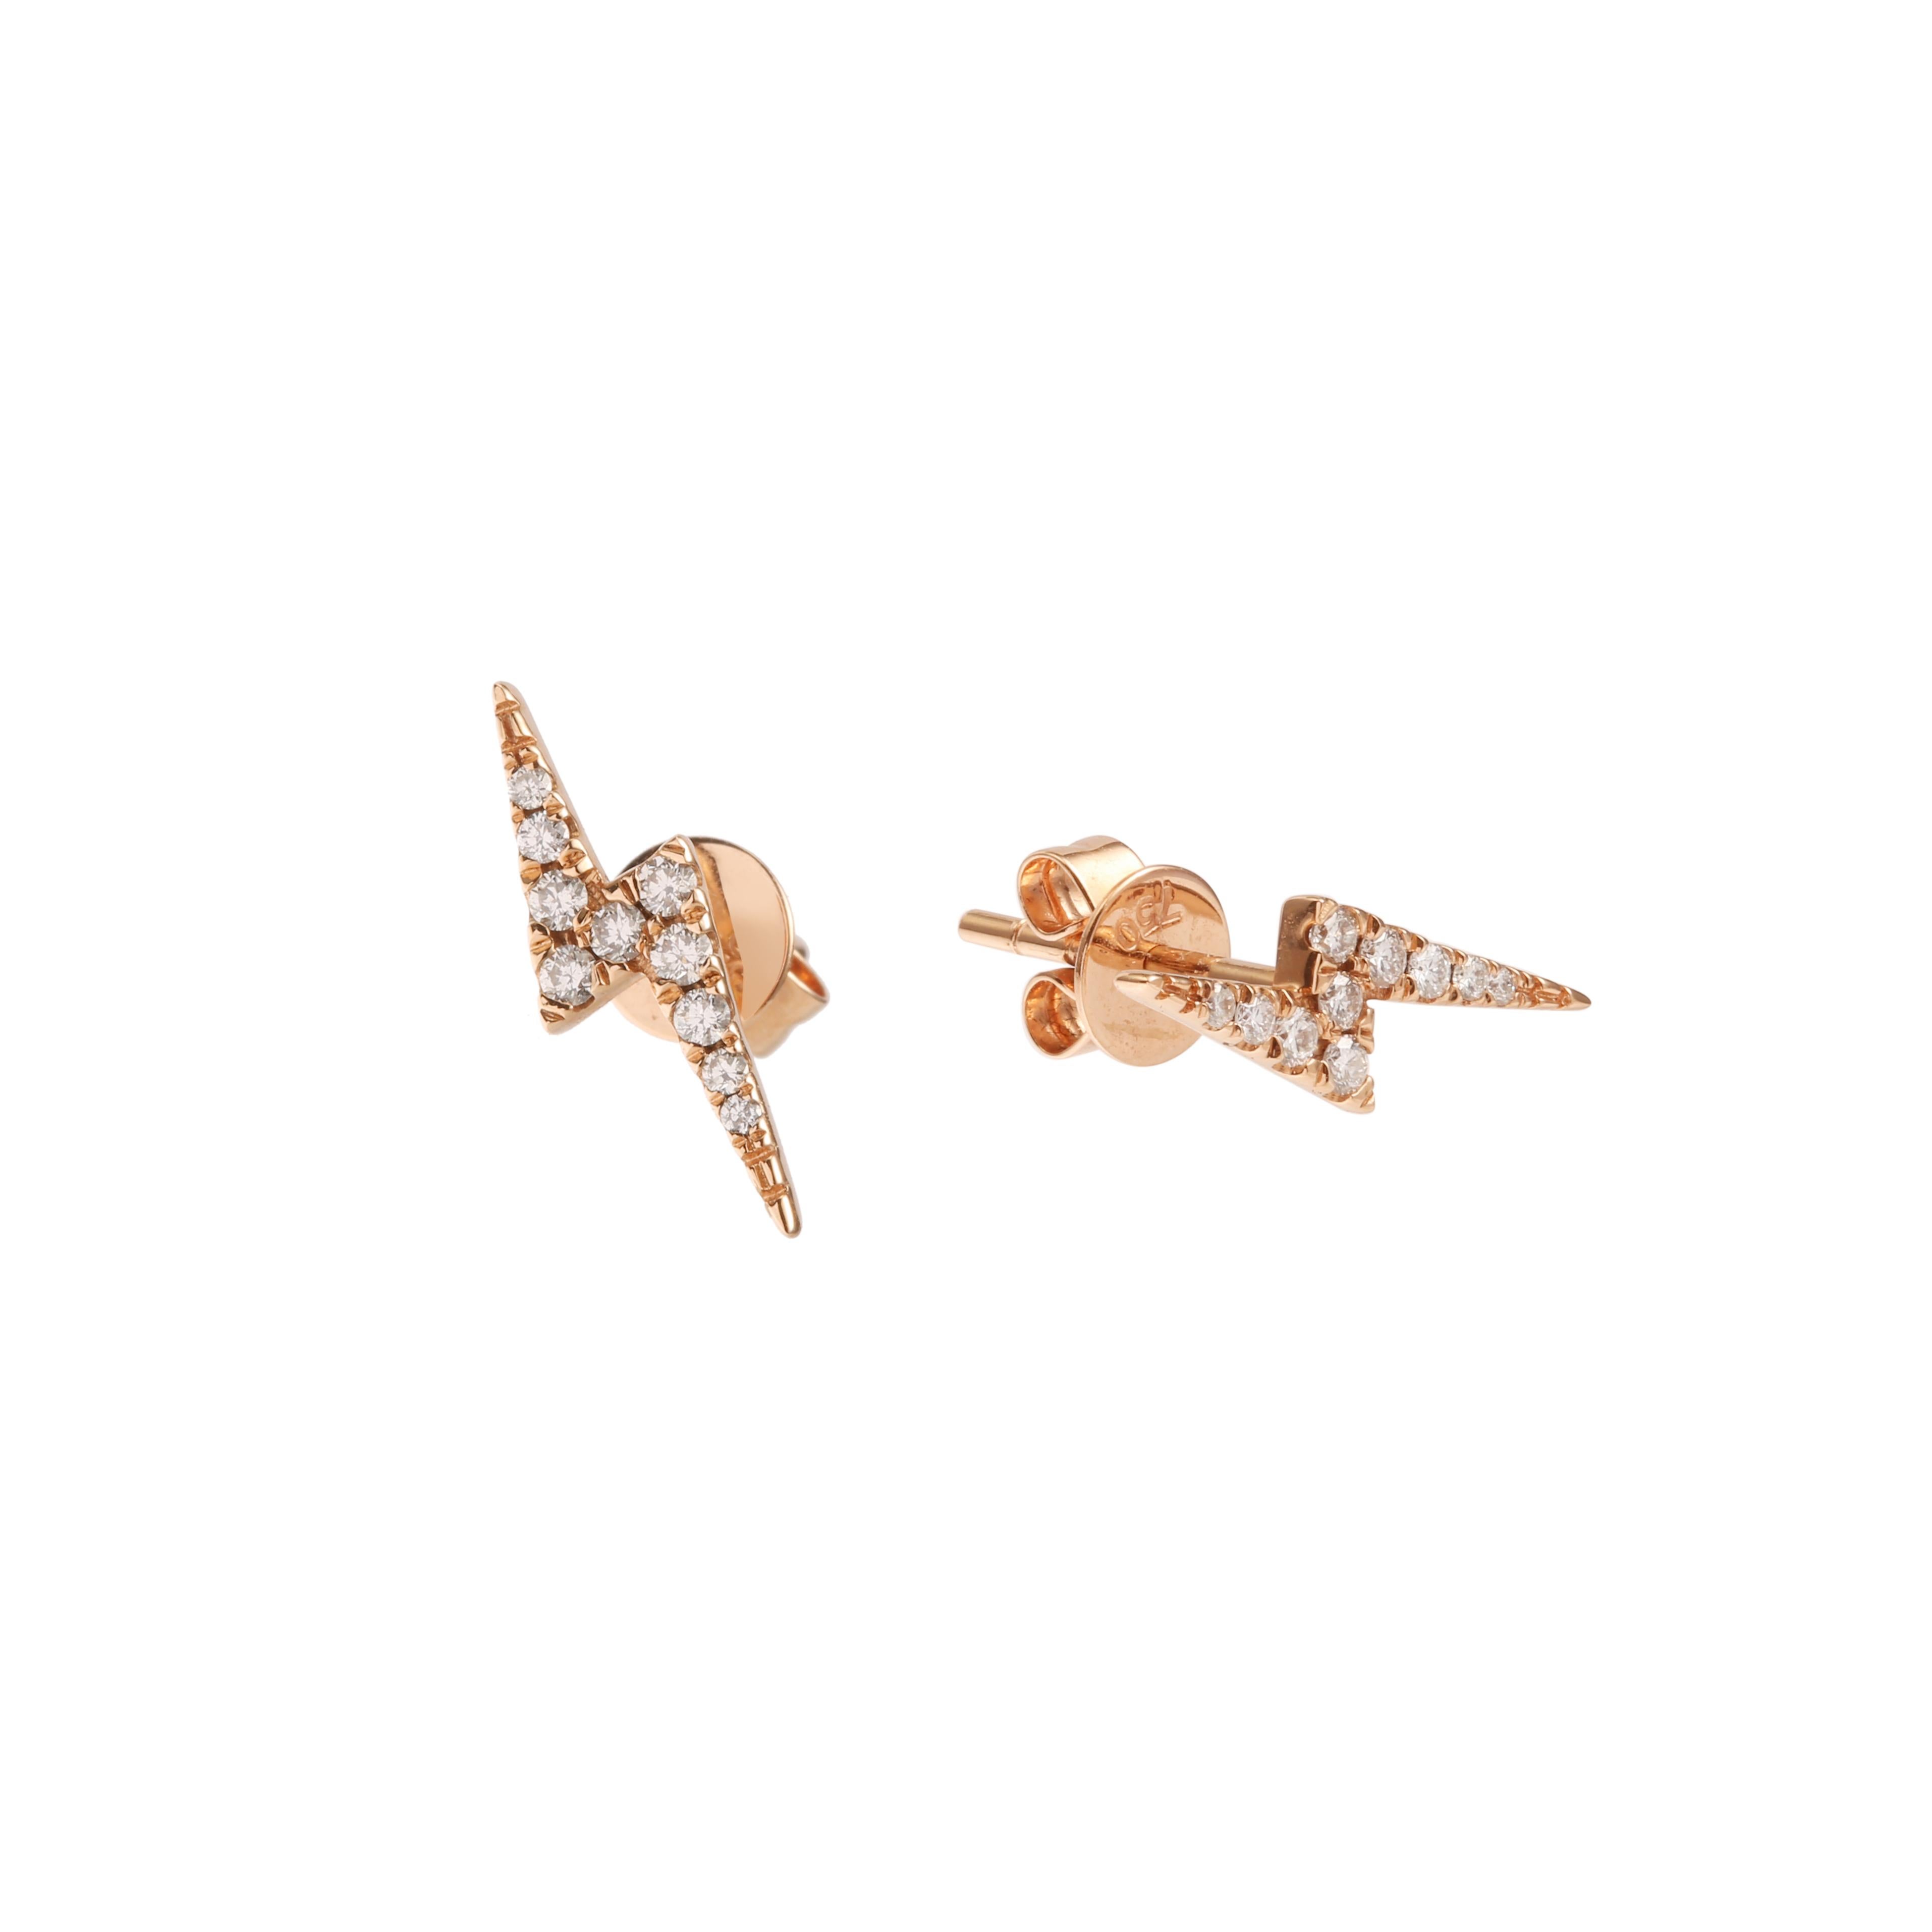 Original rose gold lightning bolt earrings paved with diamonds.

Dimensions: 14 x 5 x 1 mm (0.55 x 0.19 x 0.039 inch)

Total estimated weight of diamonds : 0.10 Carats

Total weight of the earrings : 1g

18 karat rose gold, 750/1000